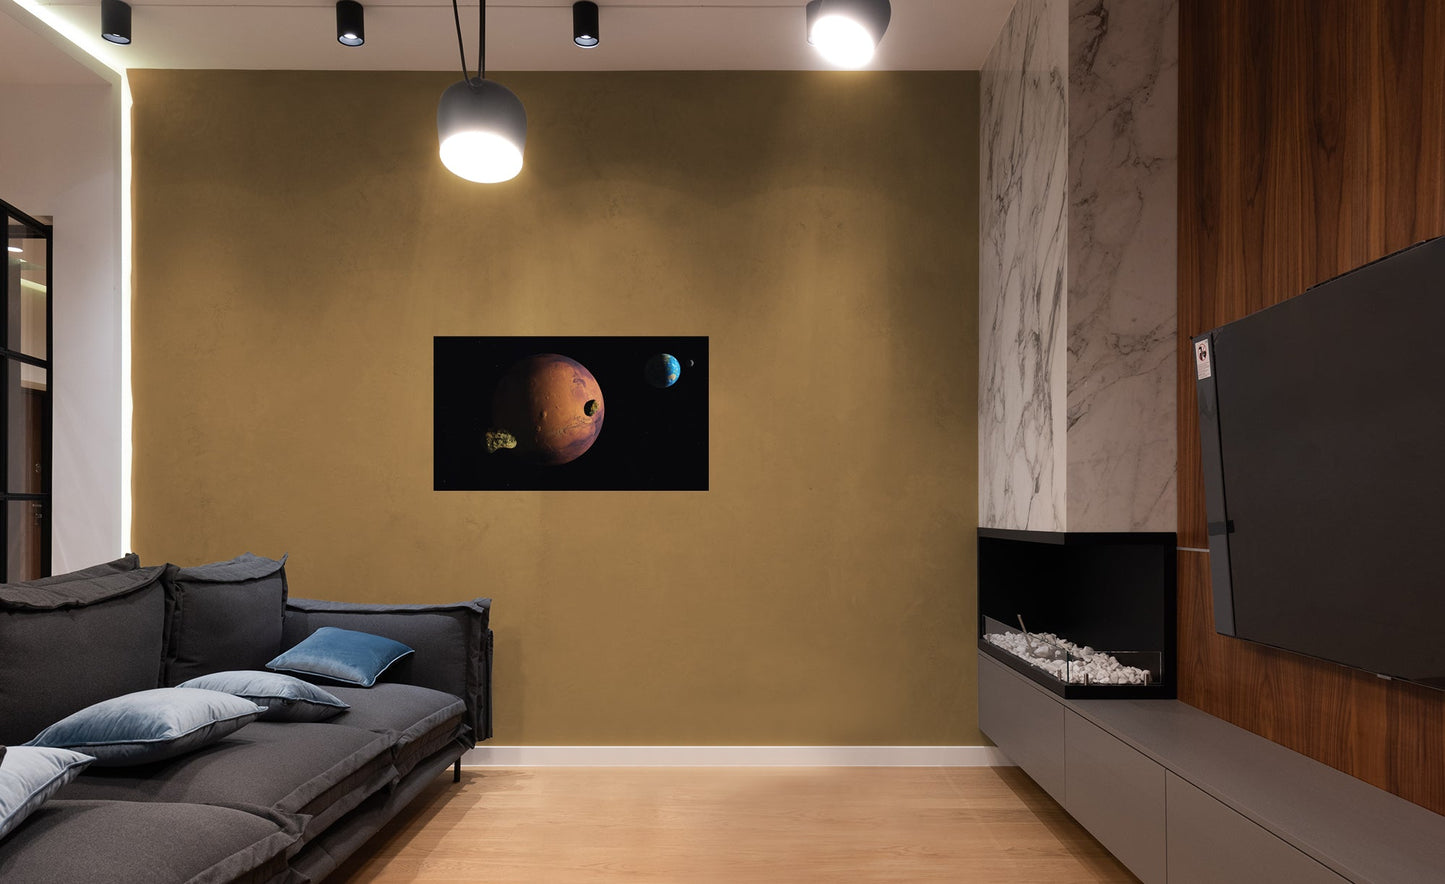 Planets:  Close-Up Mural        -   Removable     Adhesive Decal